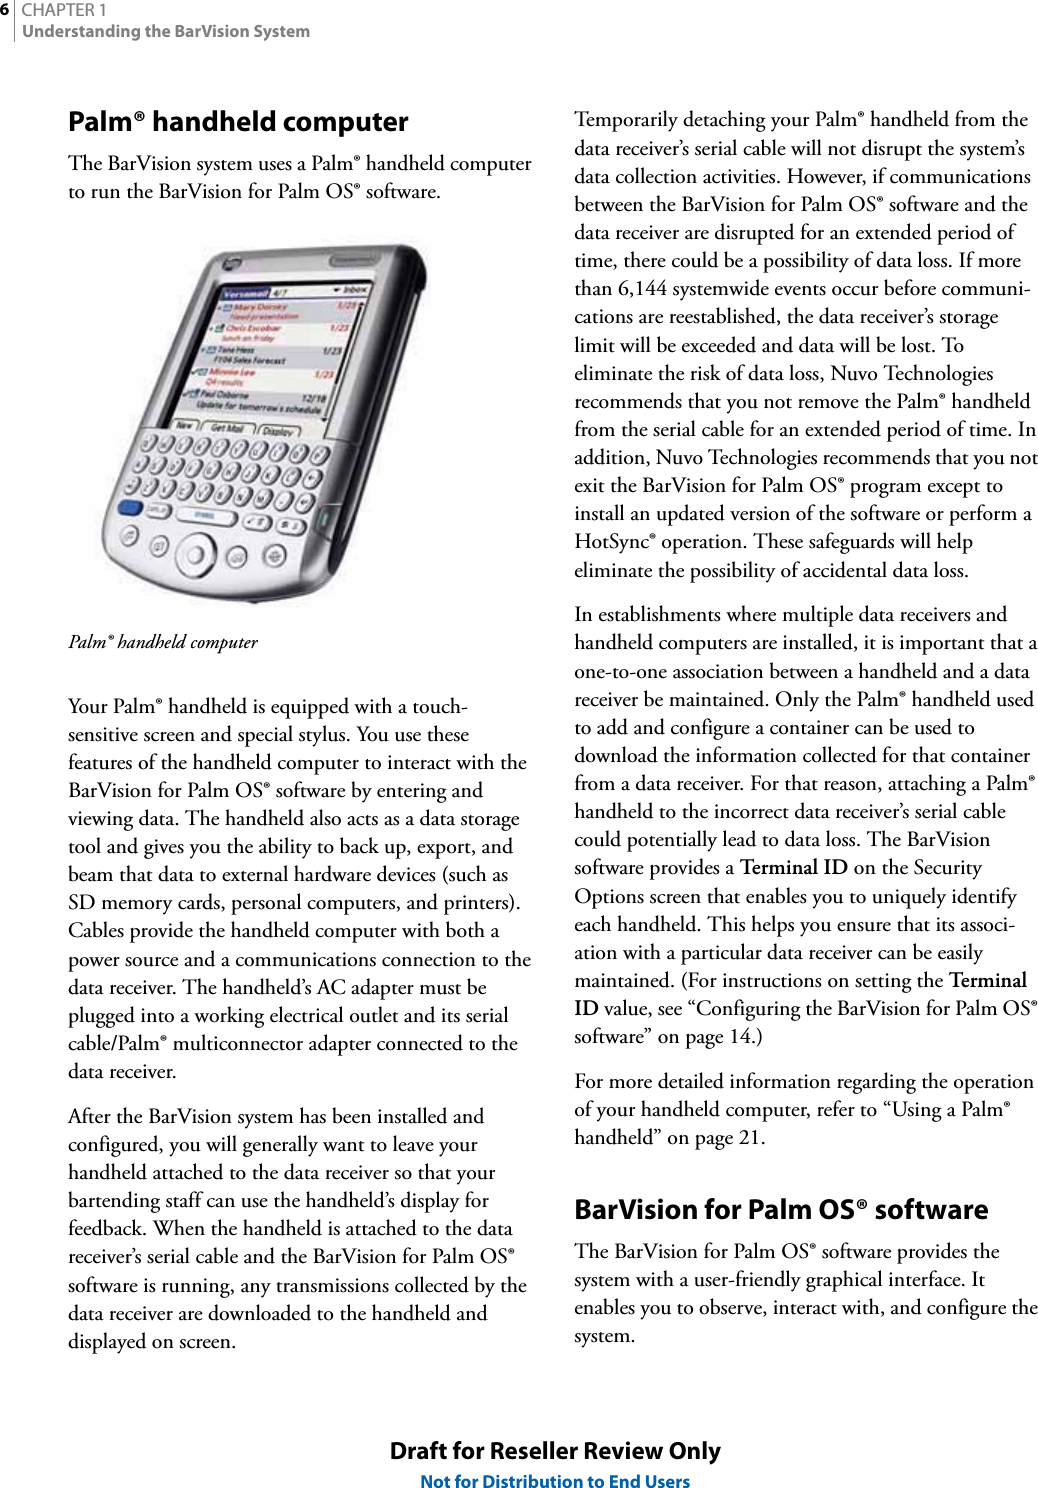 CHAPTER 16Understanding the BarVision SystemDraft for Reseller Review OnlyNot for Distribution to End UsersPalm® handheld computerThe BarVision system uses a Palm® handheld computer to run the BarVision for Palm OS® software.Palm® handheld computerYour Palm® handheld is equipped with a touch-sensitive screen and special stylus. You use these features of the handheld computer to interact with the BarVision for Palm OS® software by entering and viewing data. The handheld also acts as a data storage tool and gives you the ability to back up, export, and beam that data to external hardware devices (such as SD memory cards, personal computers, and printers). Cables provide the handheld computer with both a power source and a communications connection to the data receiver. The handheld’s AC adapter must be plugged into a working electrical outlet and its serial cable/Palm® multiconnector adapter connected to the data receiver.After the BarVision system has been installed and configured, you will generally want to leave your handheld attached to the data receiver so that your bartending staff can use the handheld’s display for feedback. When the handheld is attached to the data receiver’s serial cable and the BarVision for Palm OS® software is running, any transmissions collected by the data receiver are downloaded to the handheld and displayed on screen.Temporarily detaching your Palm® handheld from the data receiver’s serial cable will not disrupt the system’s data collection activities. However, if communications between the BarVision for Palm OS® software and the data receiver are disrupted for an extended period of time, there could be a possibility of data loss. If more than 6,144 systemwide events occur before communi-cations are reestablished, the data receiver’s storage limit will be exceeded and data will be lost. To eliminate the risk of data loss, Nuvo Technologies recommends that you not remove the Palm® handheld from the serial cable for an extended period of time. In addition, Nuvo Technologies recommends that you not exit the BarVision for Palm OS® program except to install an updated version of the software or perform a HotSync® operation. These safeguards will help eliminate the possibility of accidental data loss.In establishments where multiple data receivers and handheld computers are installed, it is important that a one-to-one association between a handheld and a data receiver be maintained. Only the Palm® handheld used to add and configure a container can be used to download the information collected for that container from a data receiver. For that reason, attaching a Palm® handheld to the incorrect data receiver’s serial cable could potentially lead to data loss. The BarVision software provides a Term i na l  I D  on the Security Options screen that enables you to uniquely identify each handheld. This helps you ensure that its associ-ation with a particular data receiver can be easily maintained. (For instructions on setting the Te rm i n al  ID value, see “Configuring the BarVision for Palm OS® software” on page 14.)For more detailed information regarding the operation of your handheld computer, refer to “Using a Palm® handheld” on page 21.BarVision for Palm OS® softwareThe BarVision for Palm OS® software provides the system with a user-friendly graphical interface. It enables you to observe, interact with, and configure the system.